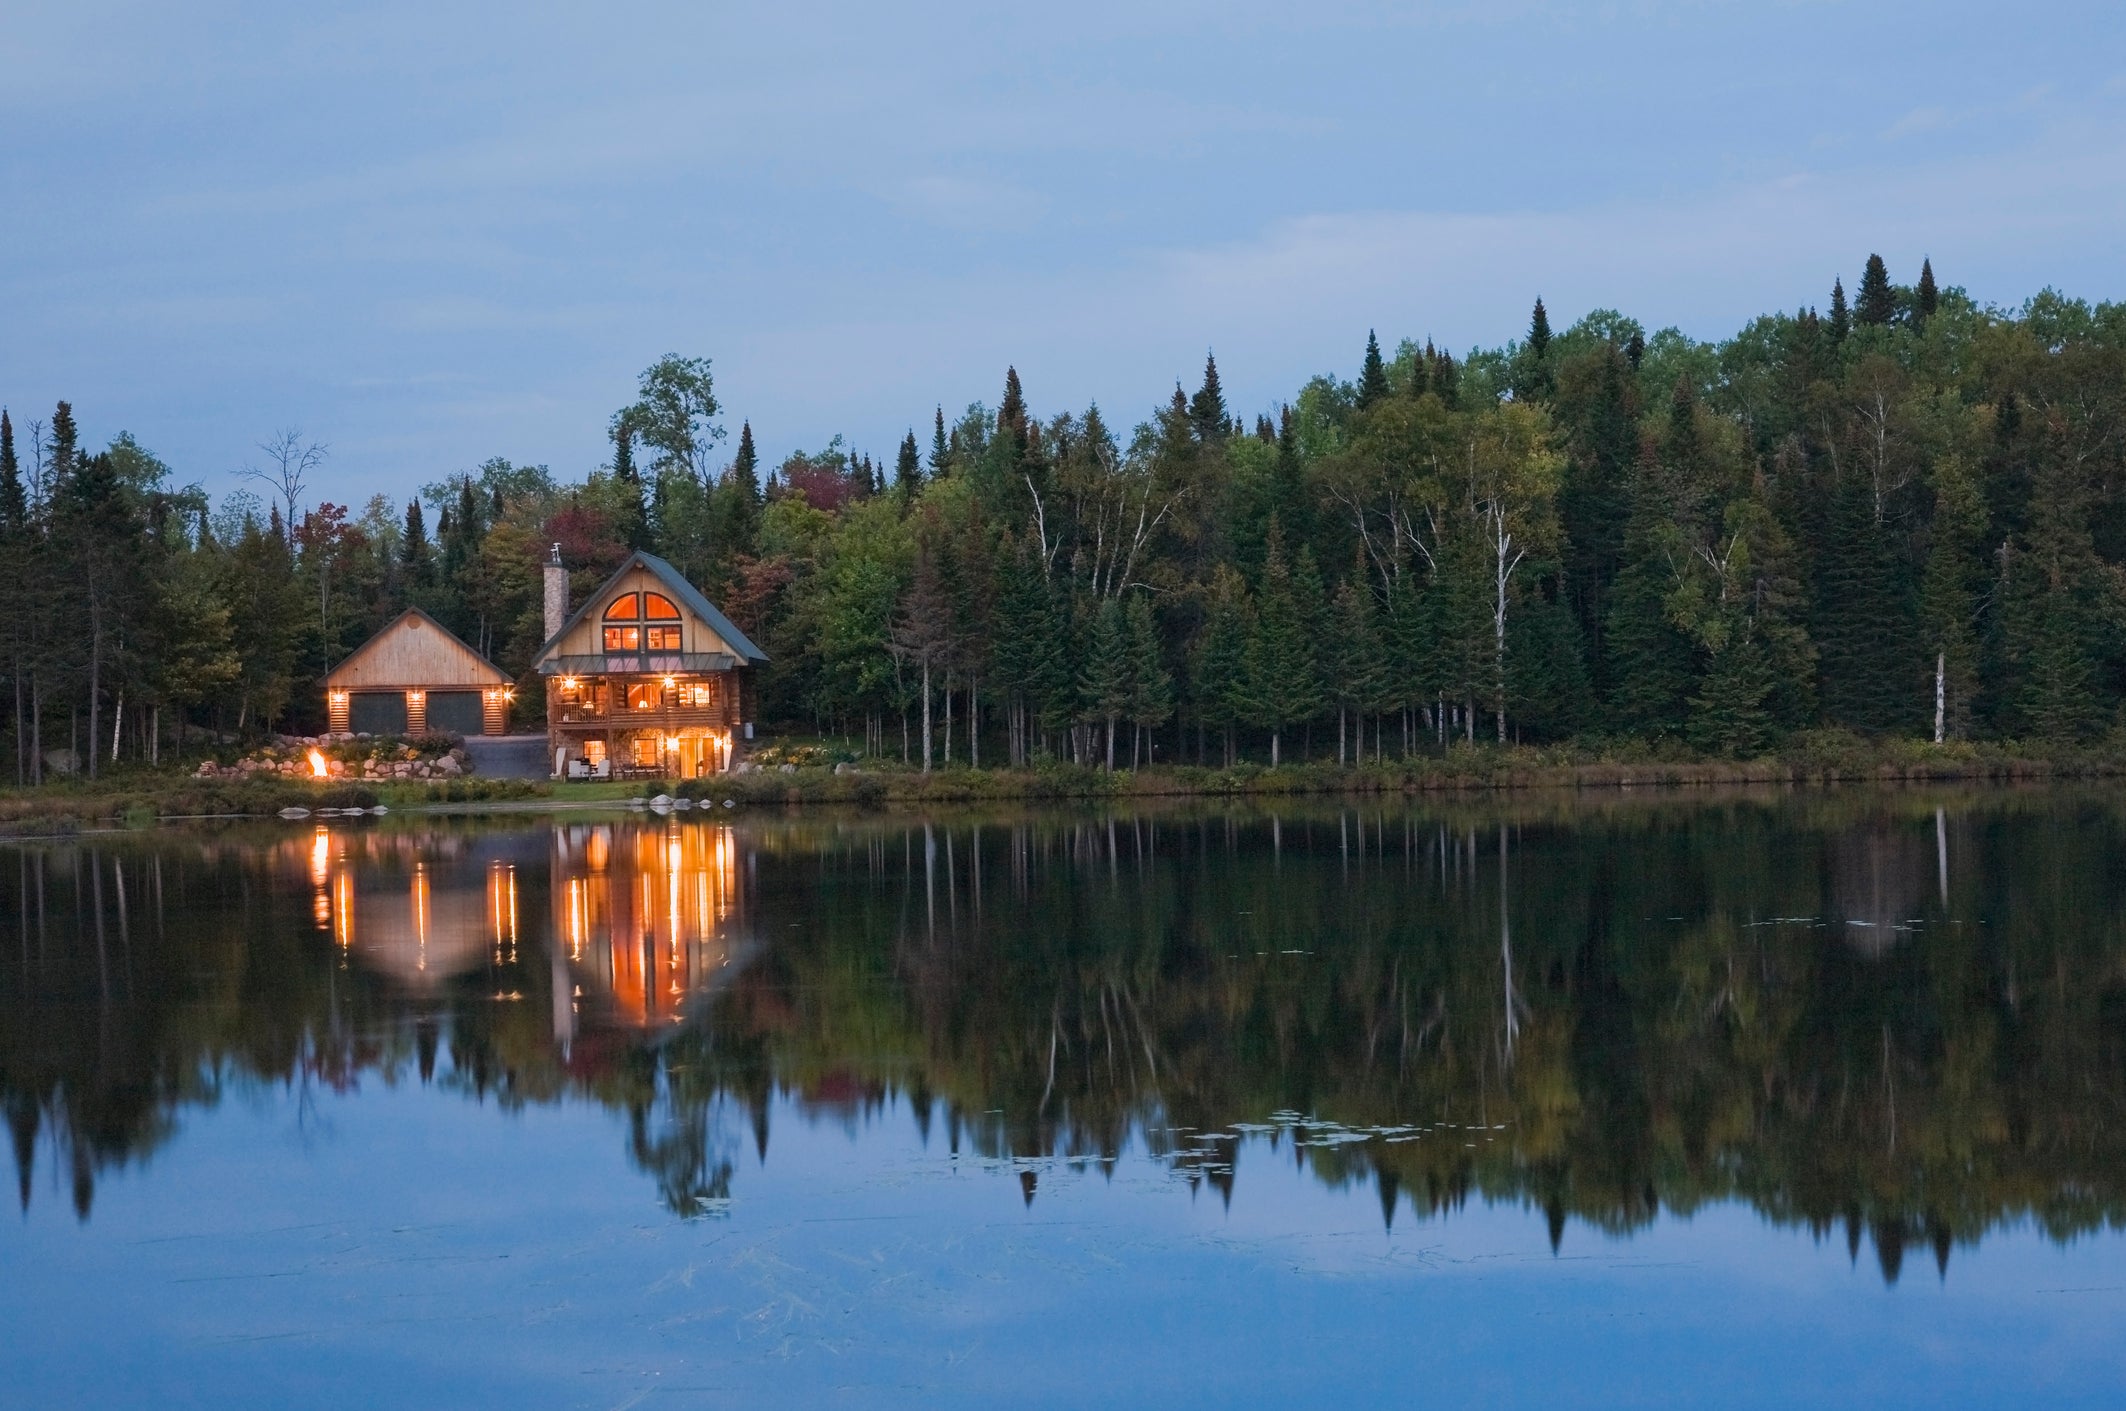 Illuminated garage and handcrafted spruce log home on edge of lake at dusk, Quebec, Canada